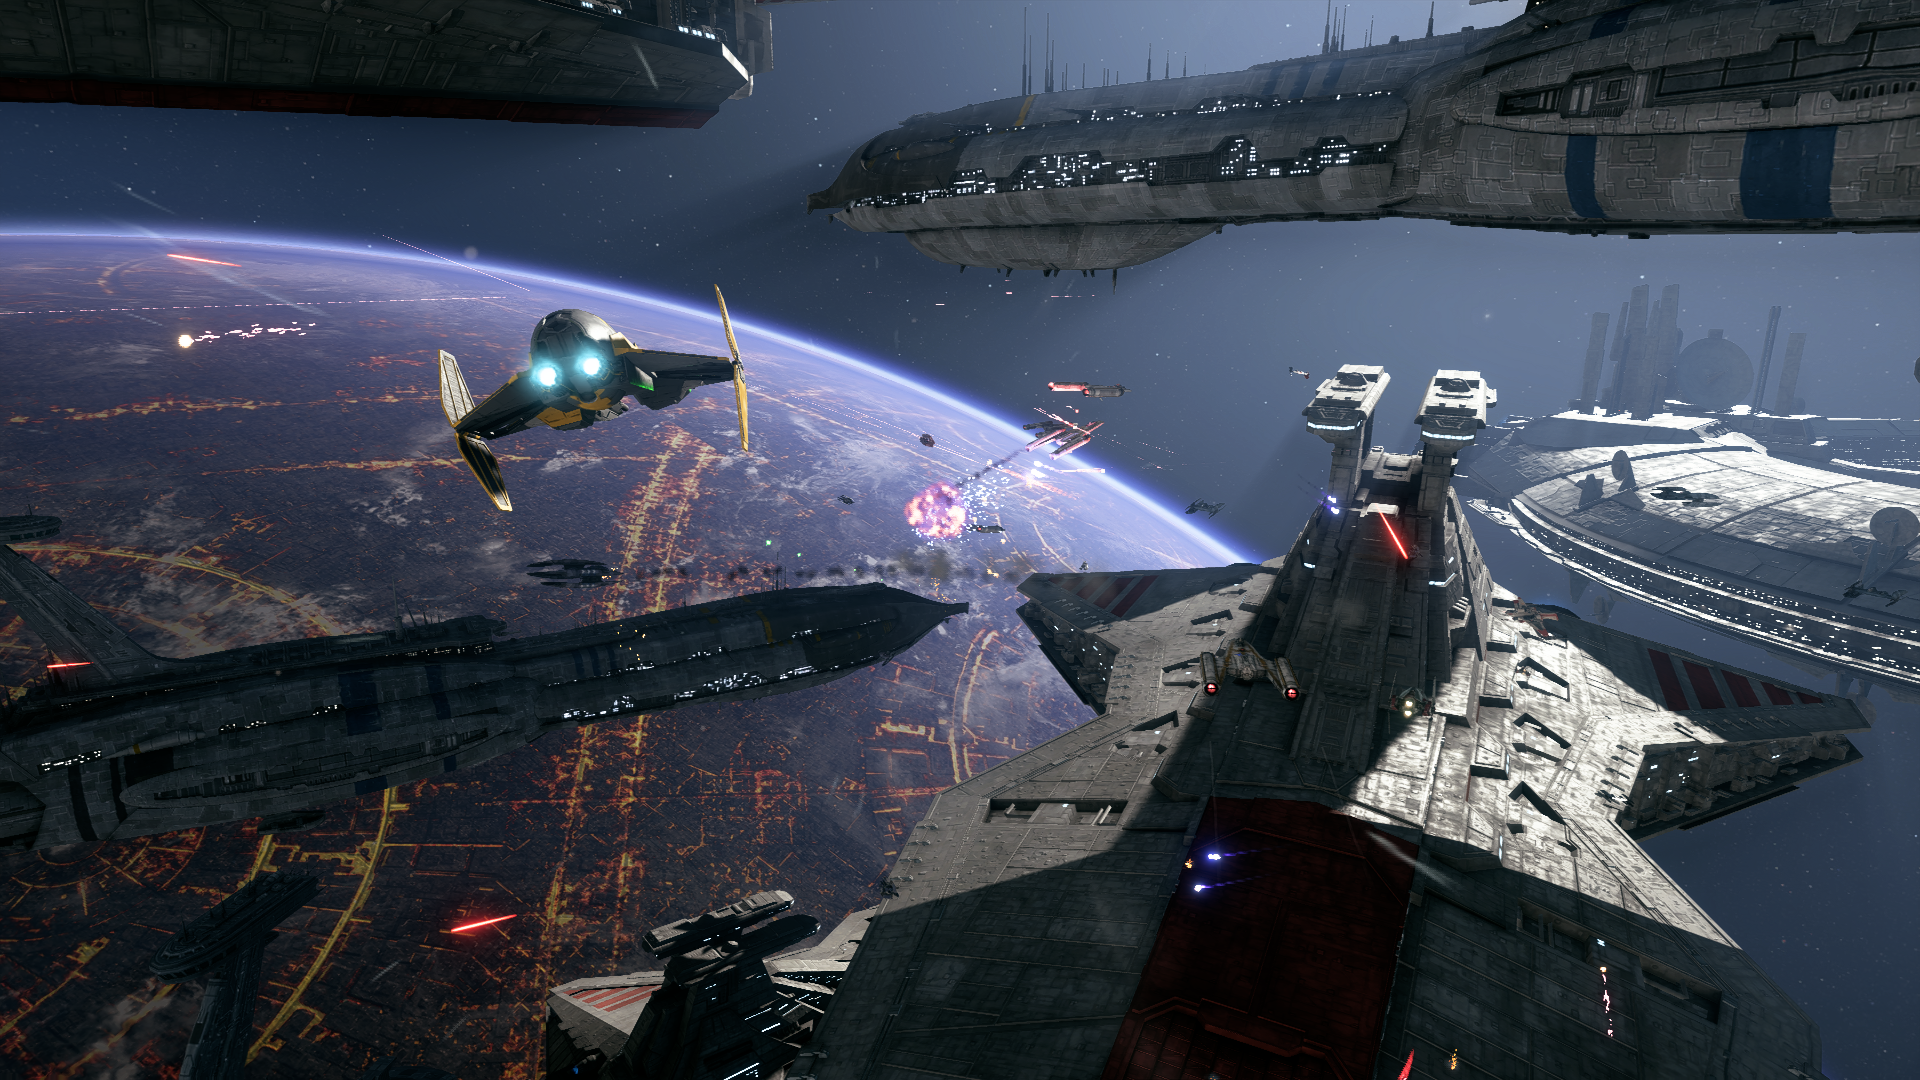 Mad shoutout to IMC for their Battle of Coruscant mod. Just played it and am very impressed. The amount of work that went into this masterpiece must have been immense. Bravo!